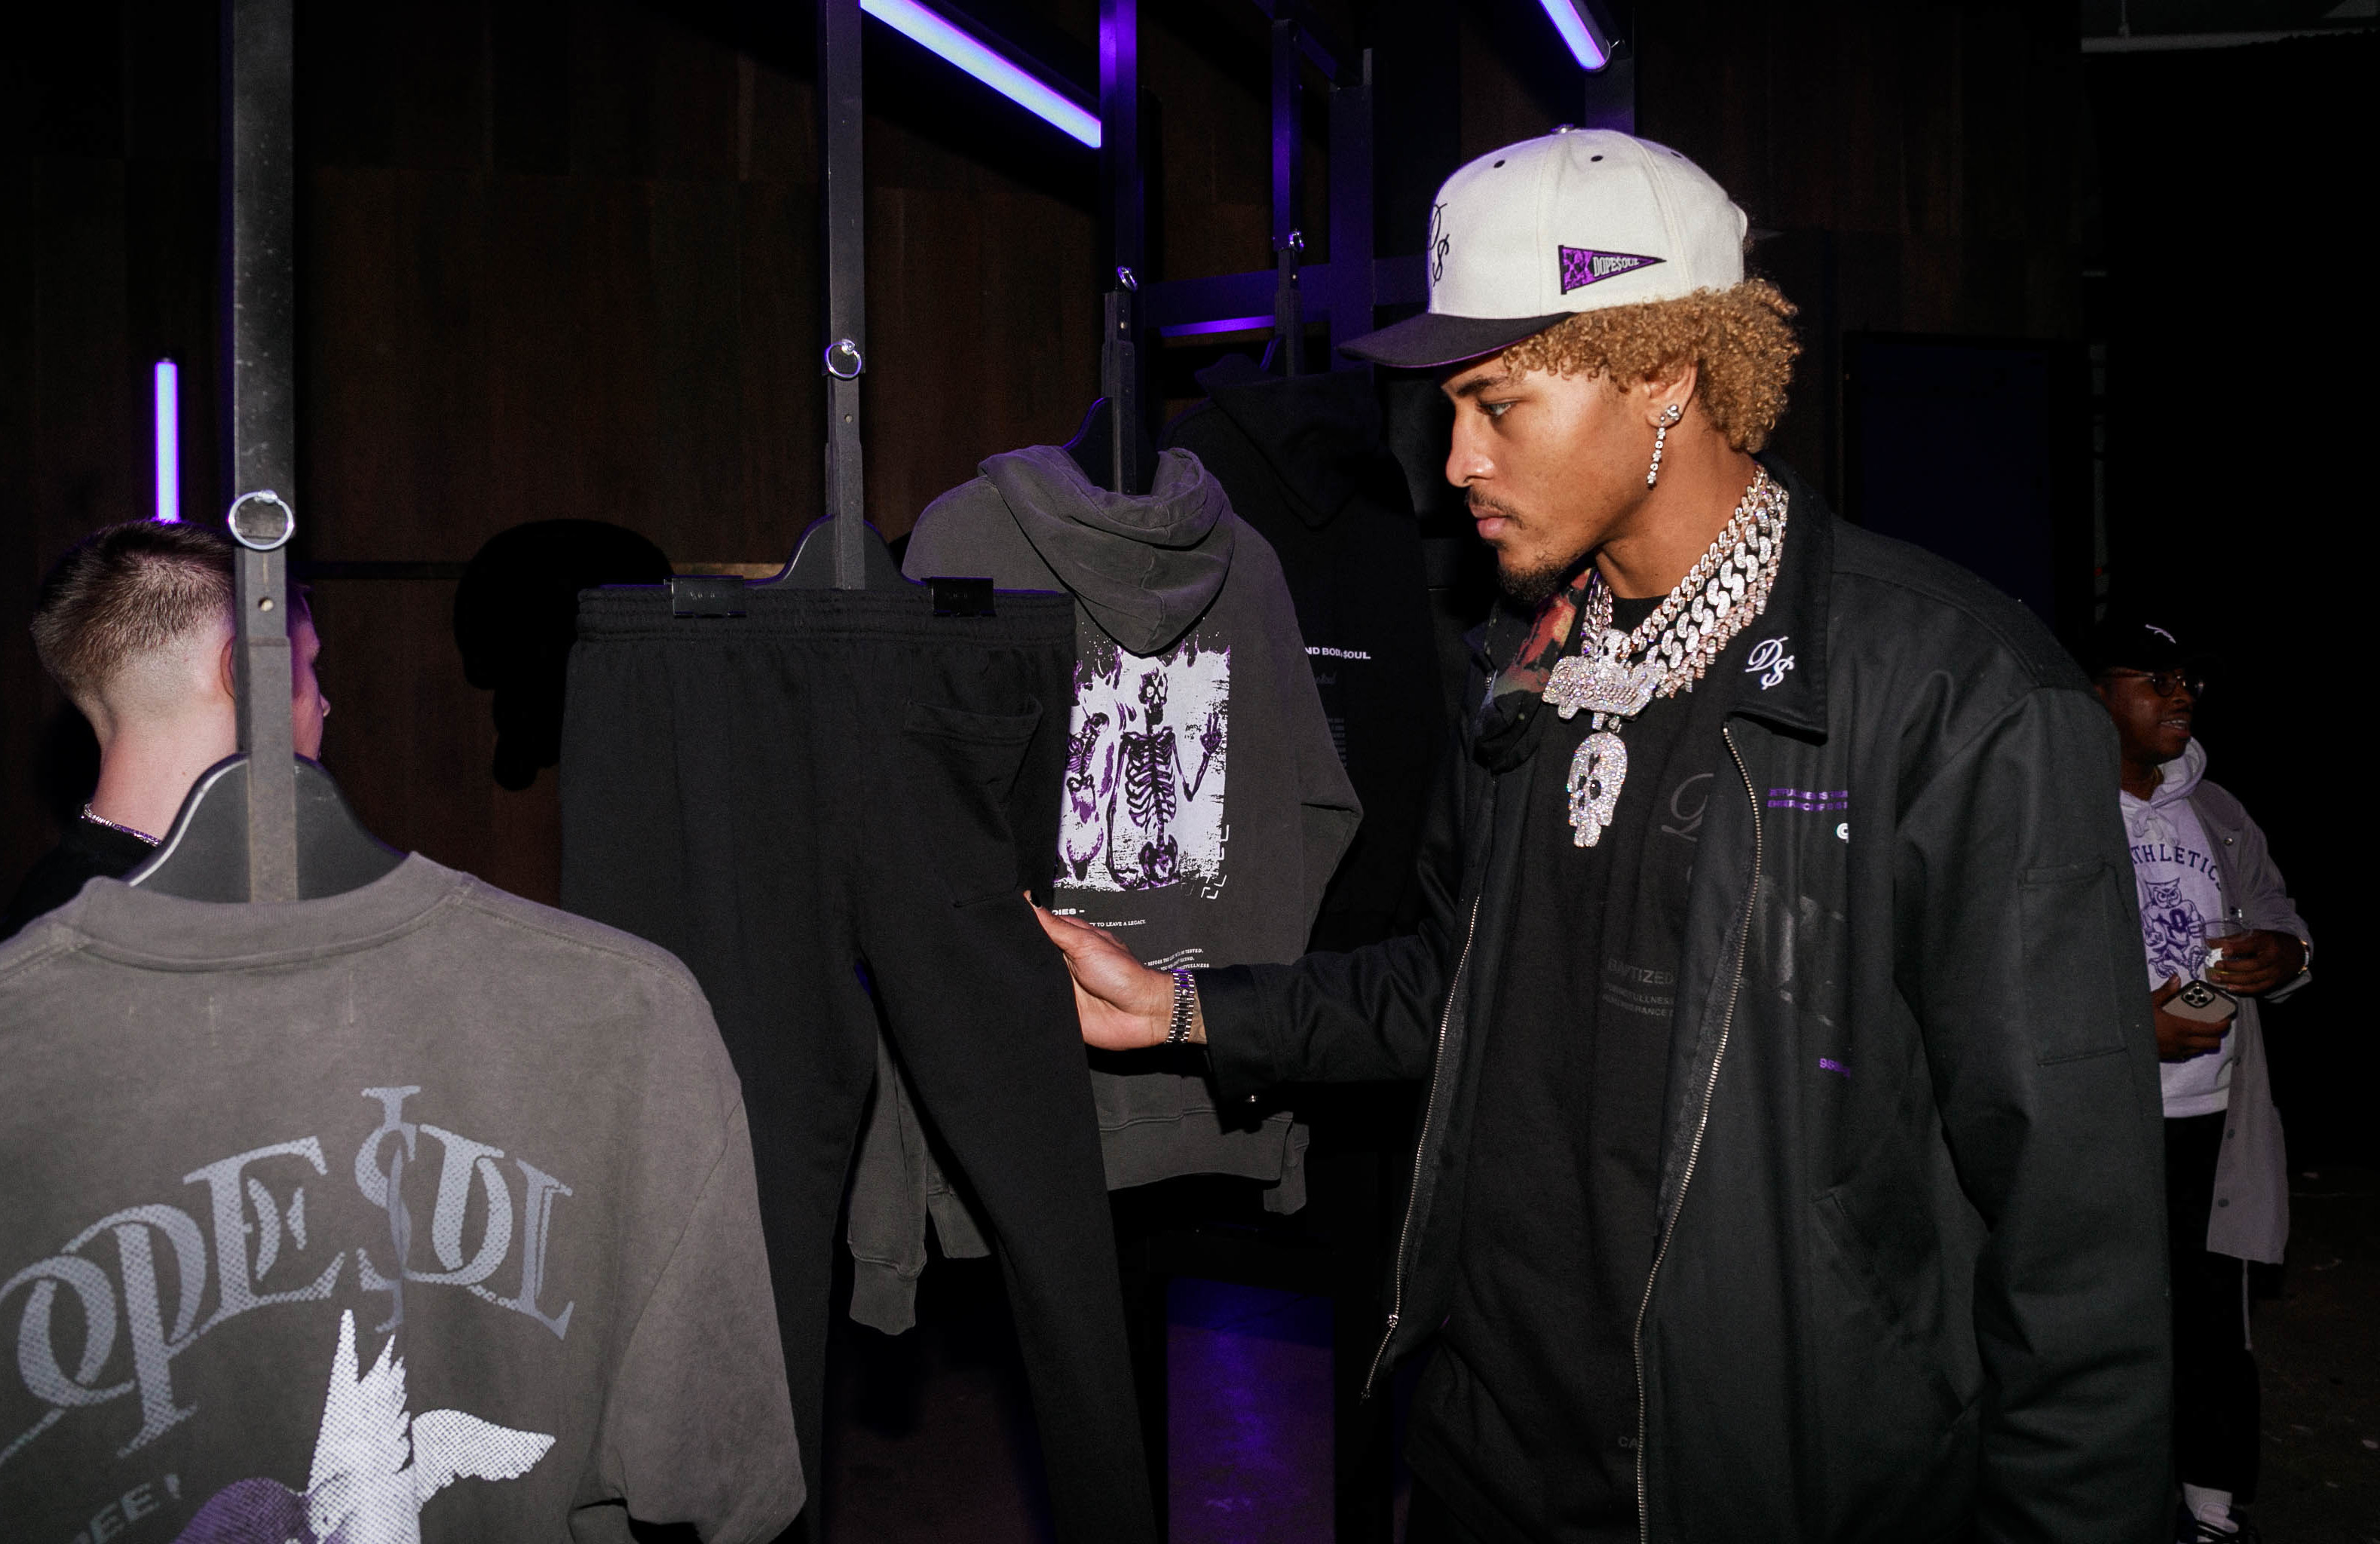 Kelly Oubre Jr. Is One of the NBA's Best-Dressed Players. Now, He Wants to  Introduce Fans to His Brand, Dope$oul.